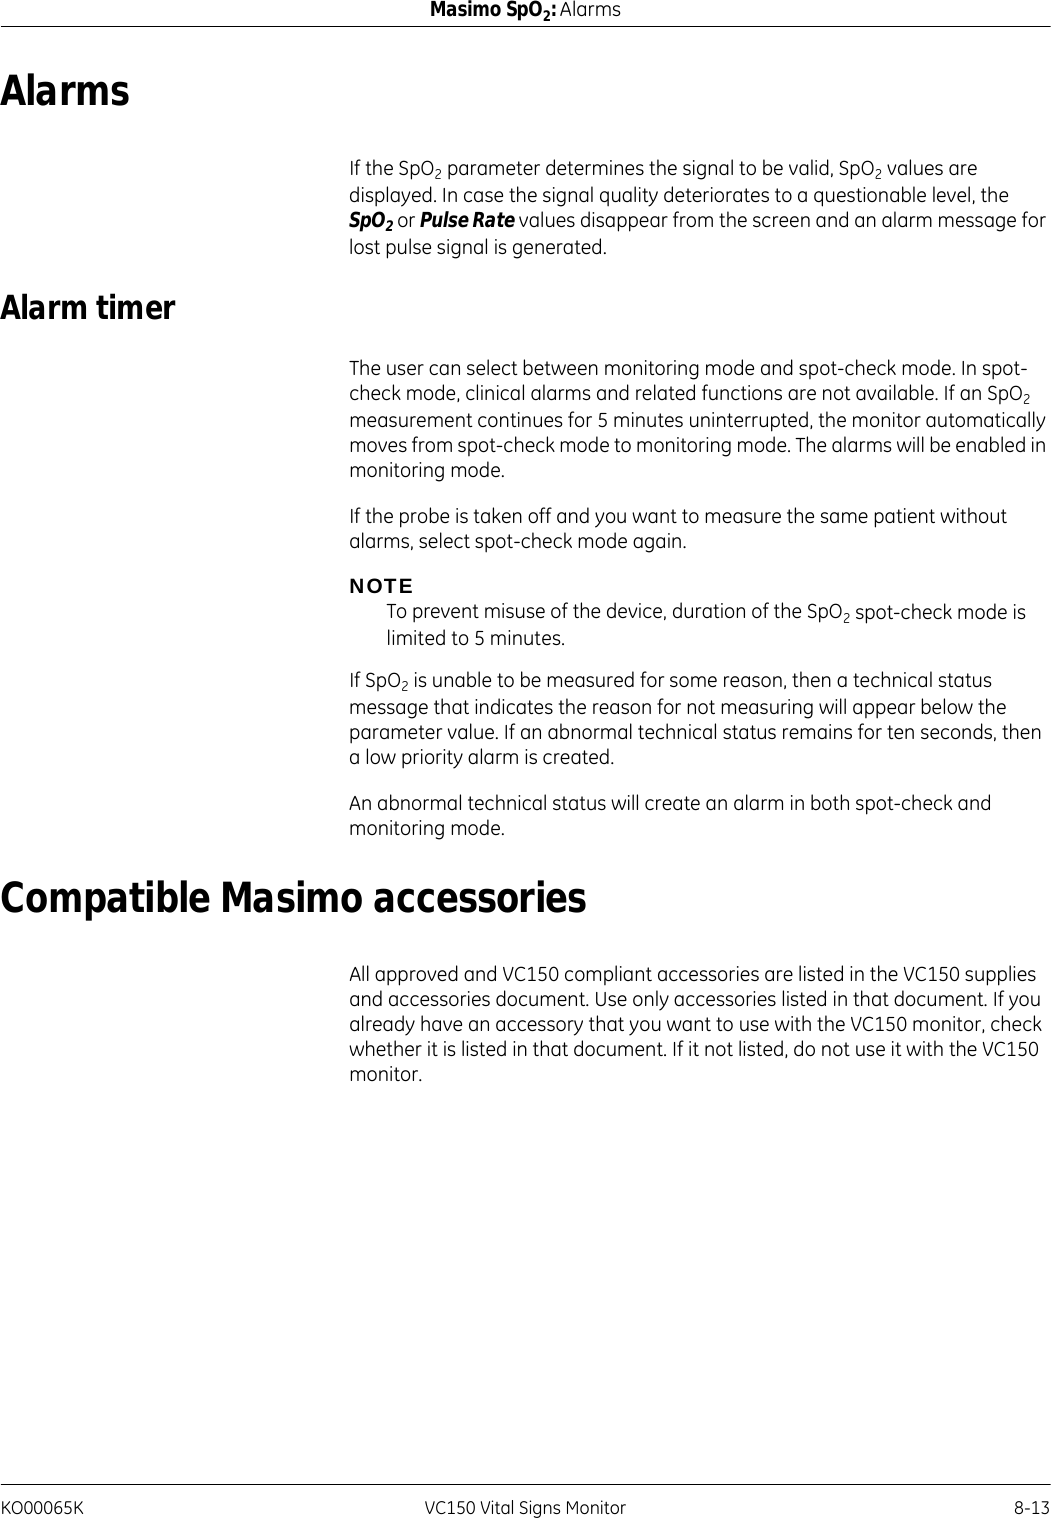 KO00065K VC150 Vital Signs Monitor 8-13Masimo SpO2: AlarmsAlarmsIf the SpO2 parameter determines the signal to be valid, SpO2 values are displayed. In case the signal quality deteriorates to a questionable level, the SpO2 or Pulse Rate values disappear from the screen and an alarm message for lost pulse signal is generated.Alarm timerThe user can select between monitoring mode and spot-check mode. In spot-check mode, clinical alarms and related functions are not available. If an SpO2 measurement continues for 5 minutes uninterrupted, the monitor automatically moves from spot-check mode to monitoring mode. The alarms will be enabled in monitoring mode.If the probe is taken off and you want to measure the same patient without alarms, select spot-check mode again.NOTETo prevent misuse of the device, duration of the SpO2 spot-check mode is limited to 5 minutes.If SpO2 is unable to be measured for some reason, then a technical status message that indicates the reason for not measuring will appear below the parameter value. If an abnormal technical status remains for ten seconds, then a low priority alarm is created.An abnormal technical status will create an alarm in both spot-check and monitoring mode.Compatible Masimo accessoriesAll approved and VC150 compliant accessories are listed in the VC150 supplies and accessories document. Use only accessories listed in that document. If you already have an accessory that you want to use with the VC150 monitor, check whether it is listed in that document. If it not listed, do not use it with the VC150 monitor.